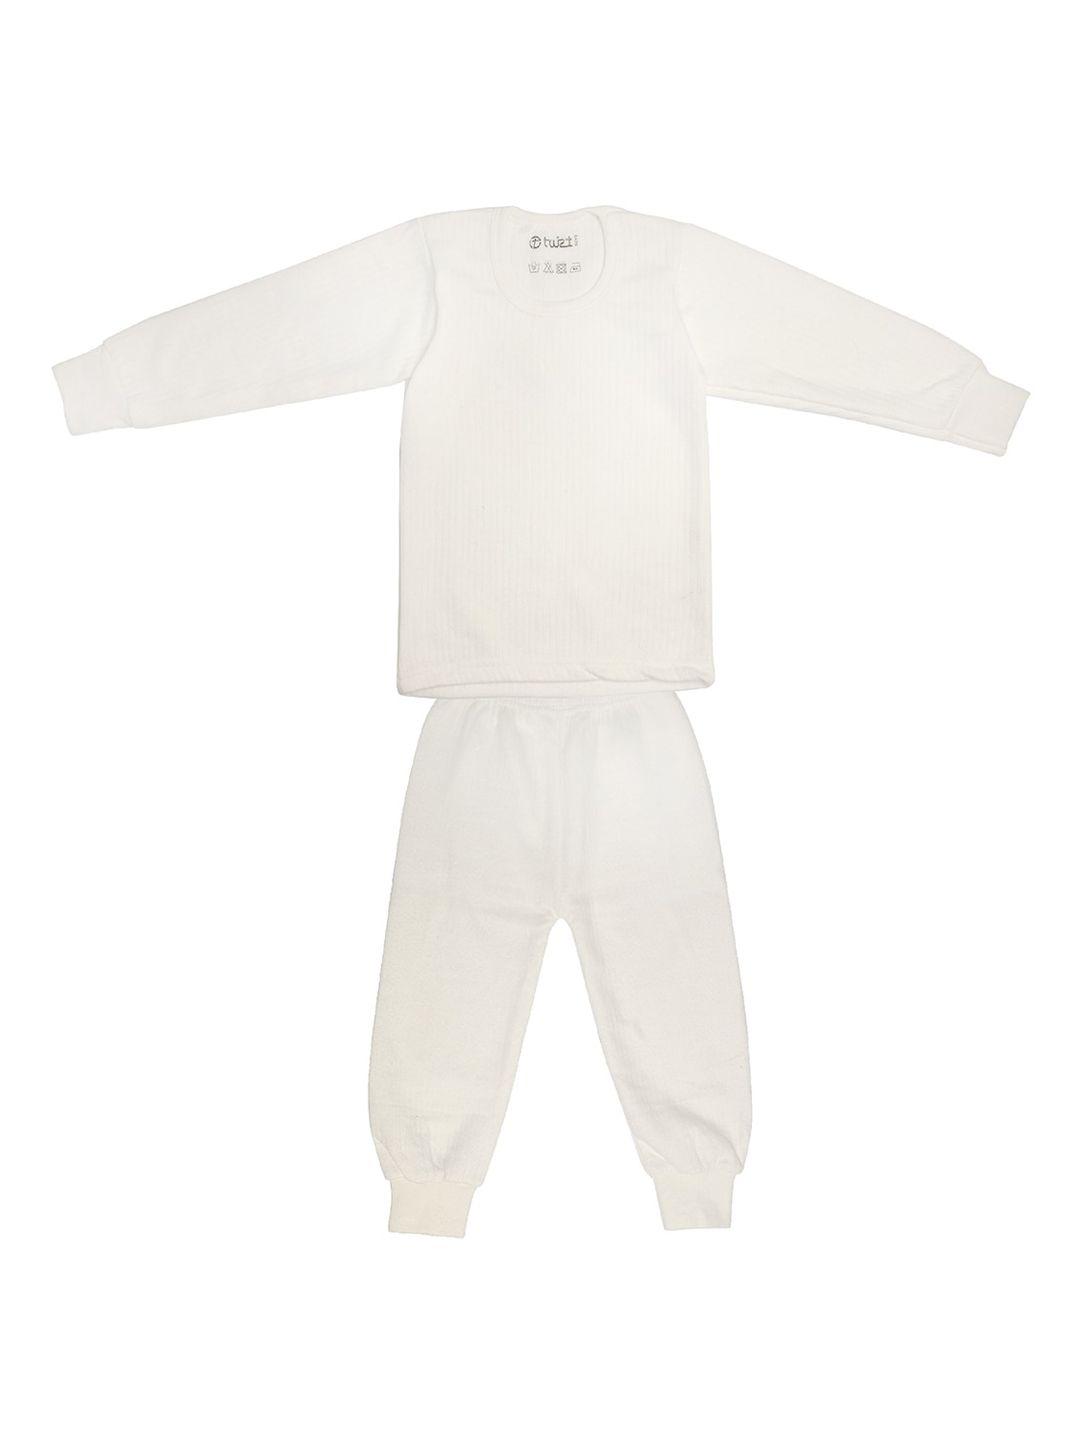 tiny-hug-boys-off-white-solid-anti-bacterial-thermal-set